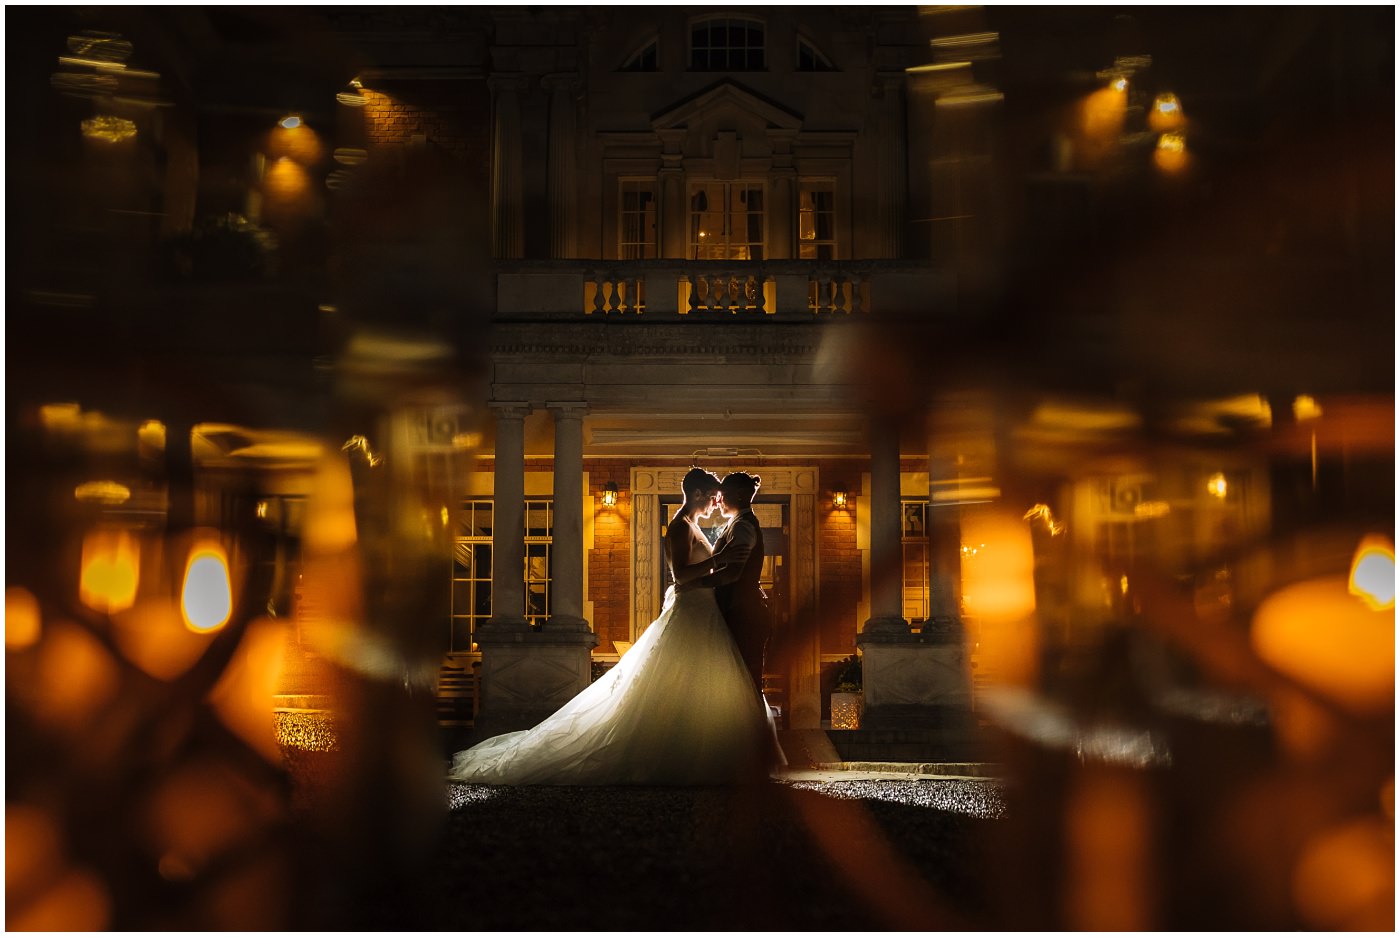 Creative night time wedding photography at Eaves Hall